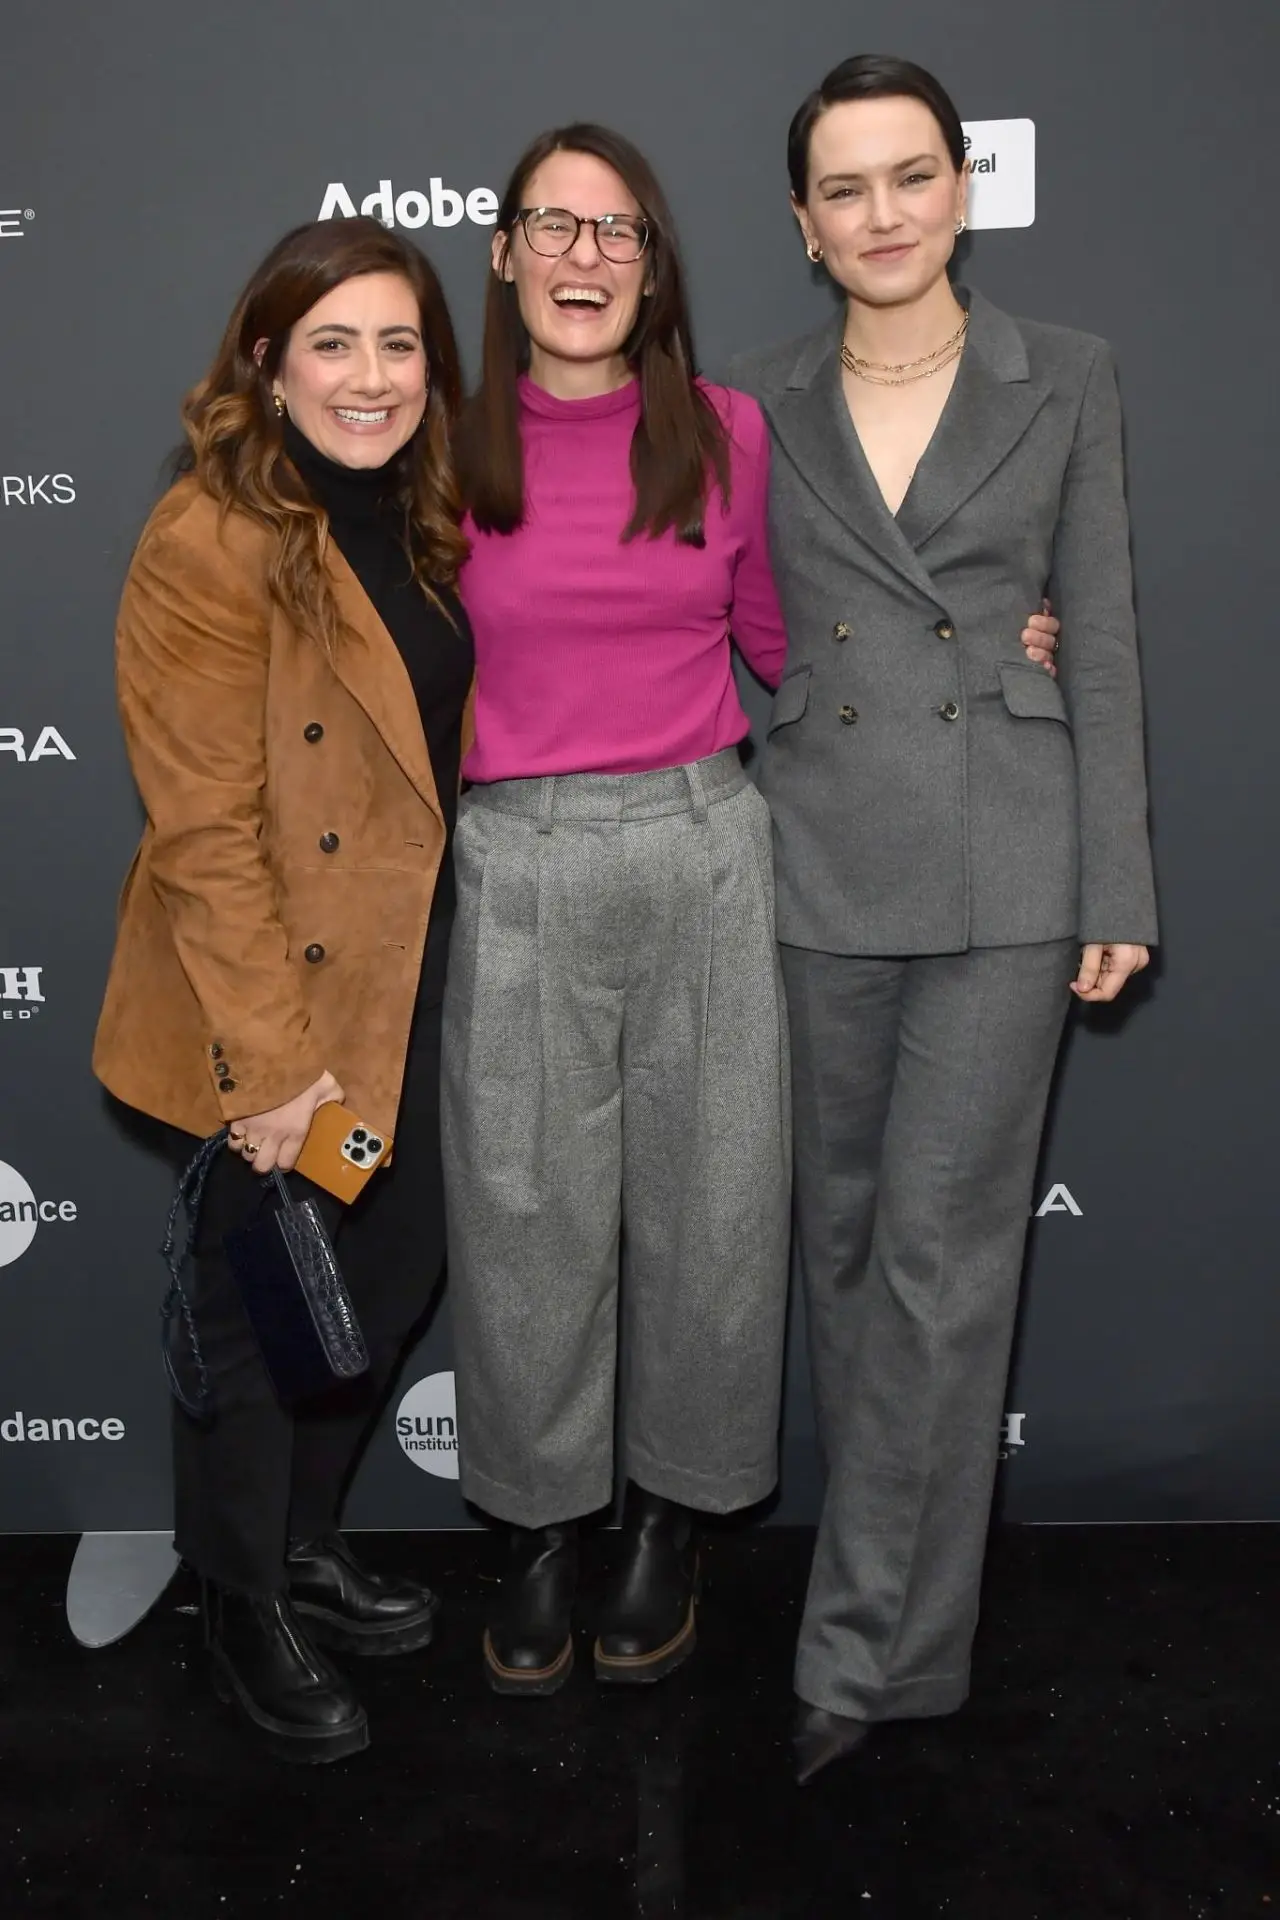 DAISY RIDLEY AT SOMETIMES I THINK ABOUT DYING PREMIERE AT SUNDANCE FILM FESTIVAL9